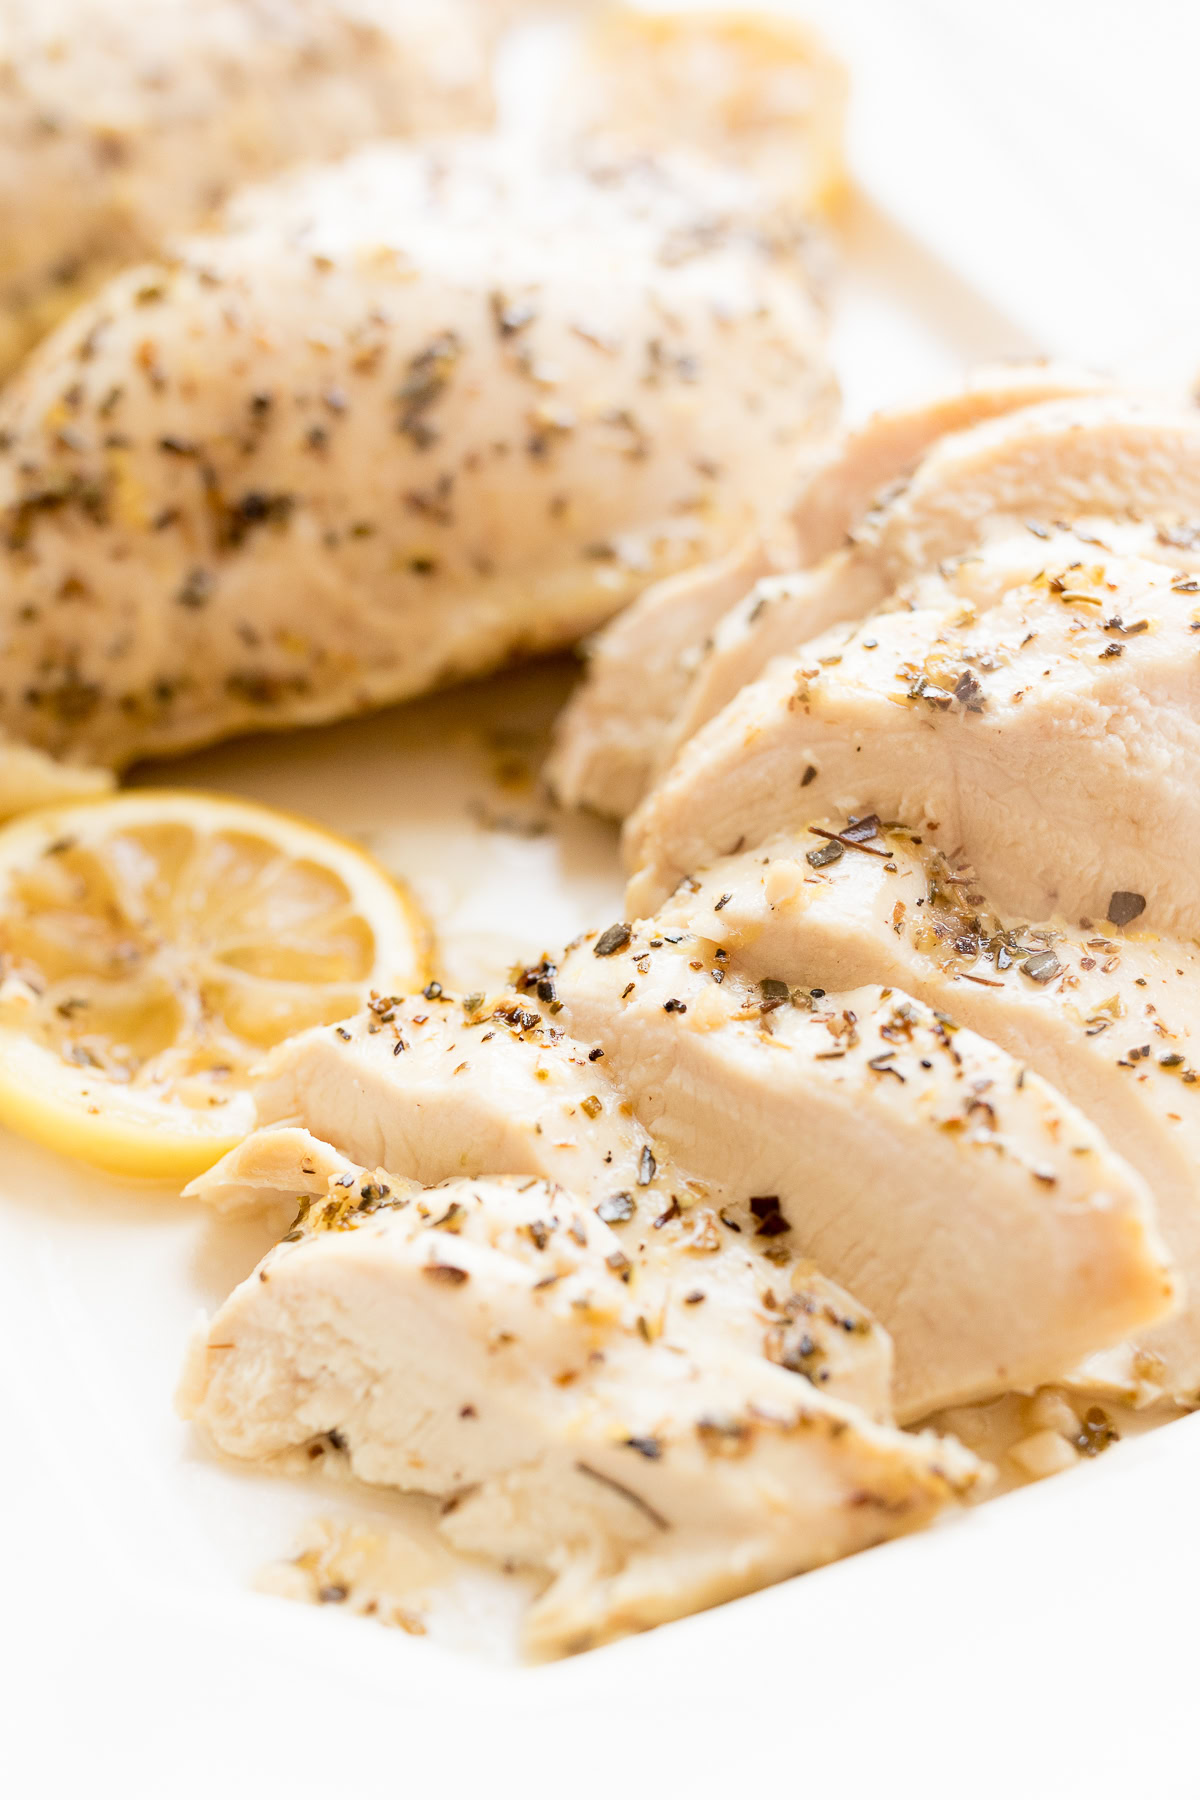 Sliced, seasoned chicken breast served on a white plate with lemon sauce.